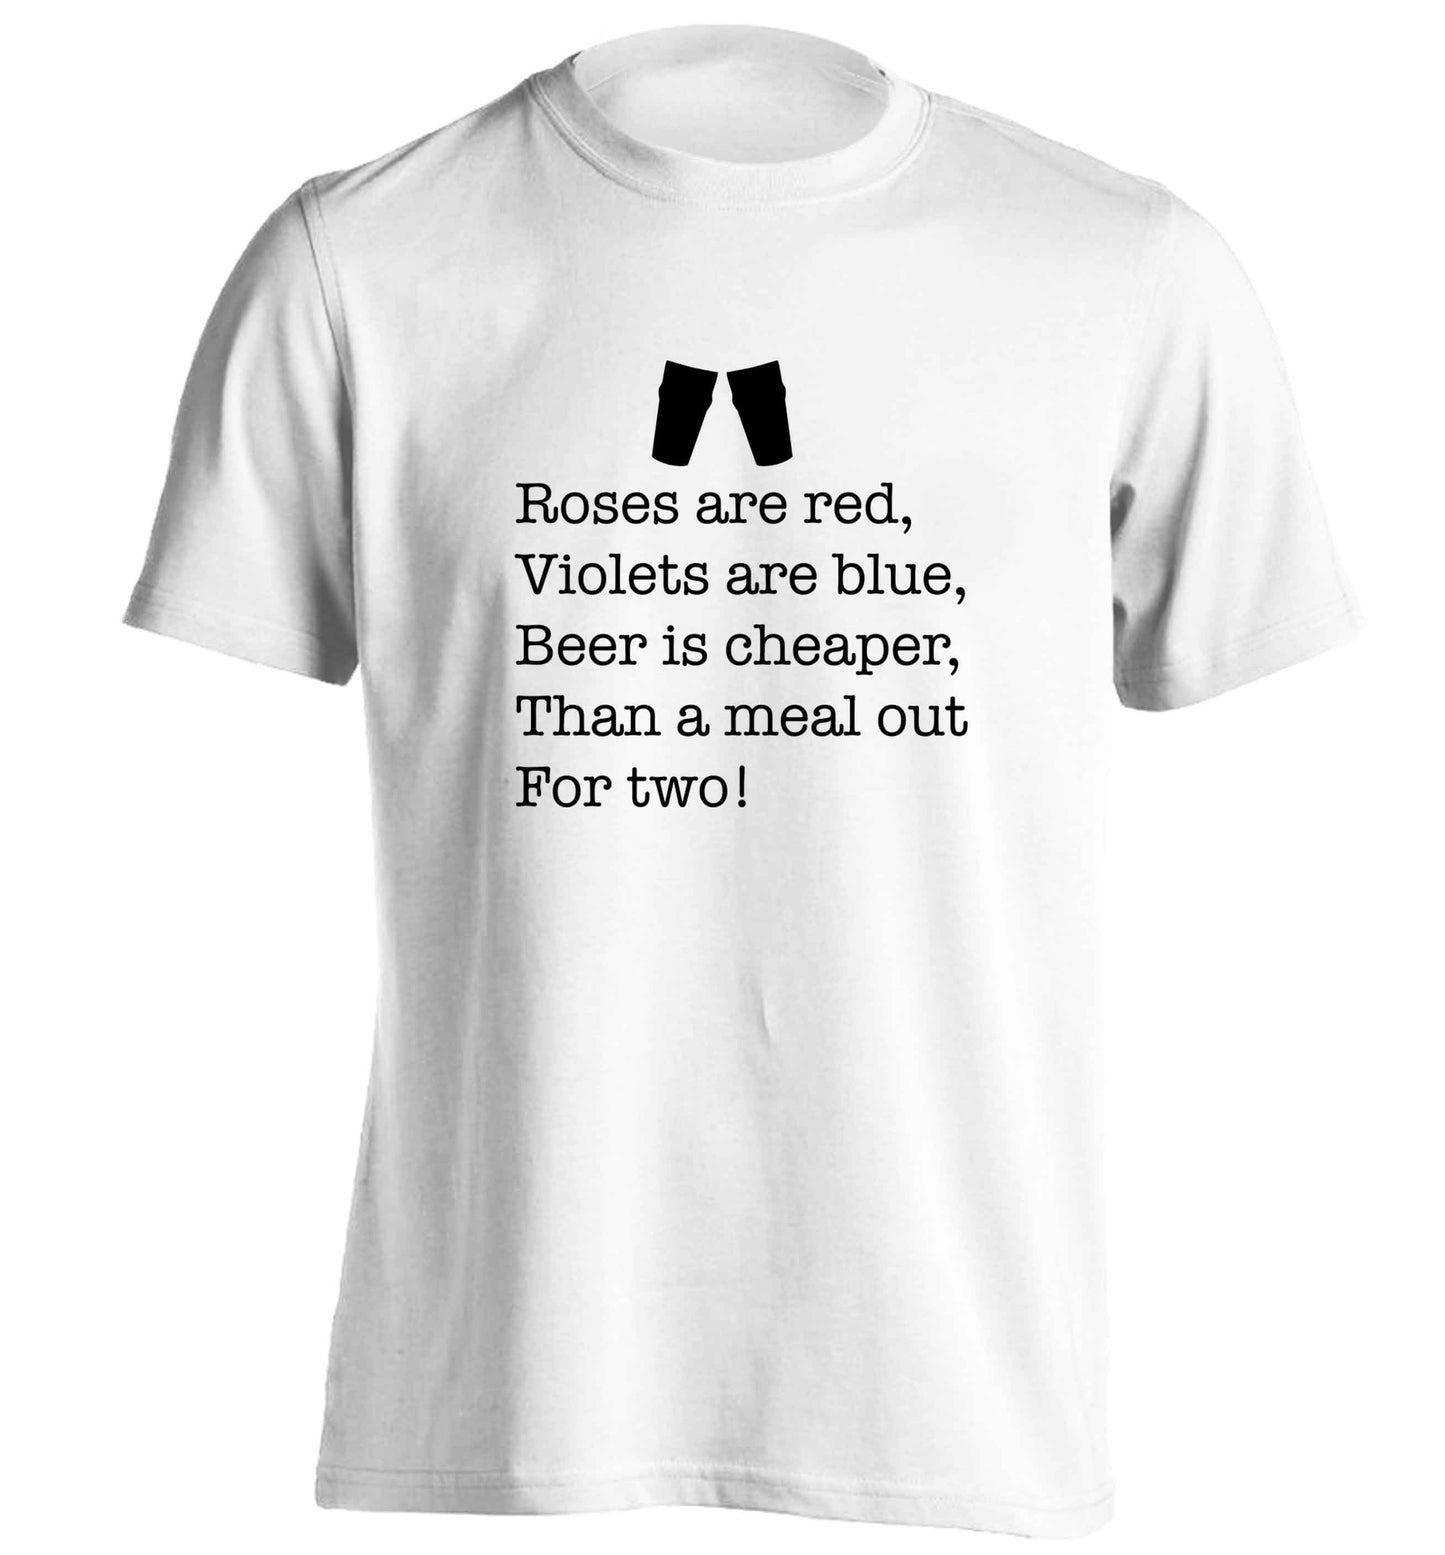 Roses are red violets are blue beer is cheaper than a meal out for two adults unisex white Tshirt 2XL